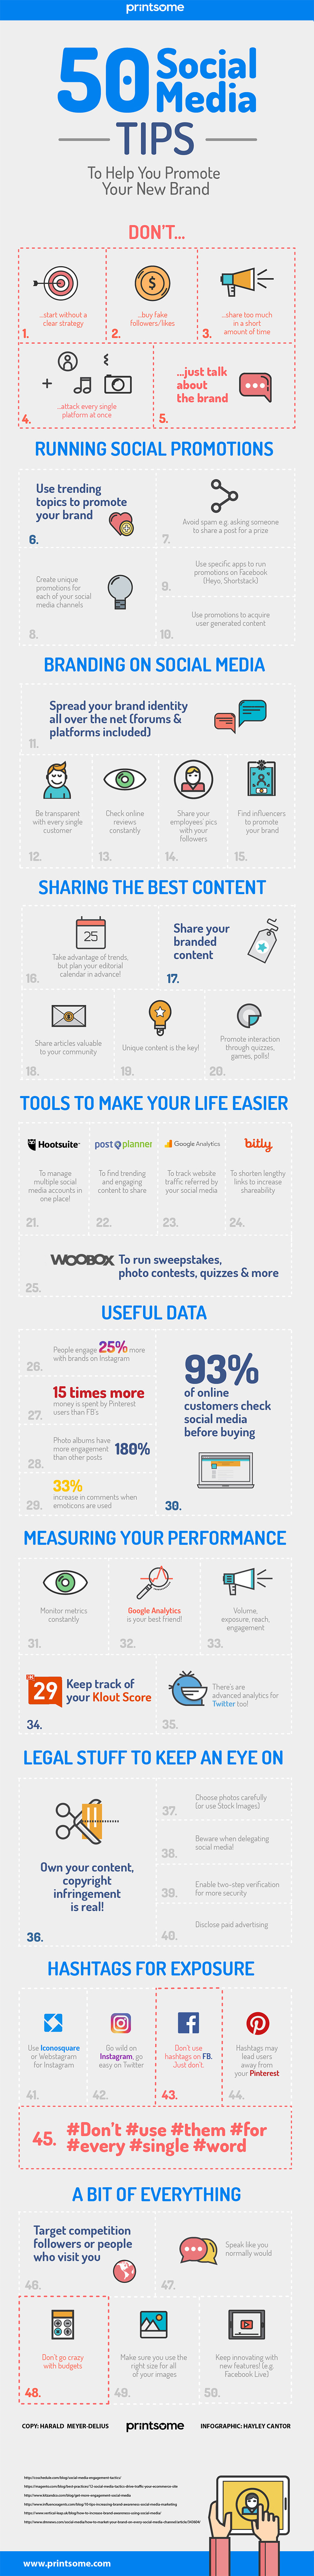 Infographic: 50 Tips For Promoting Your Brand on Social Media